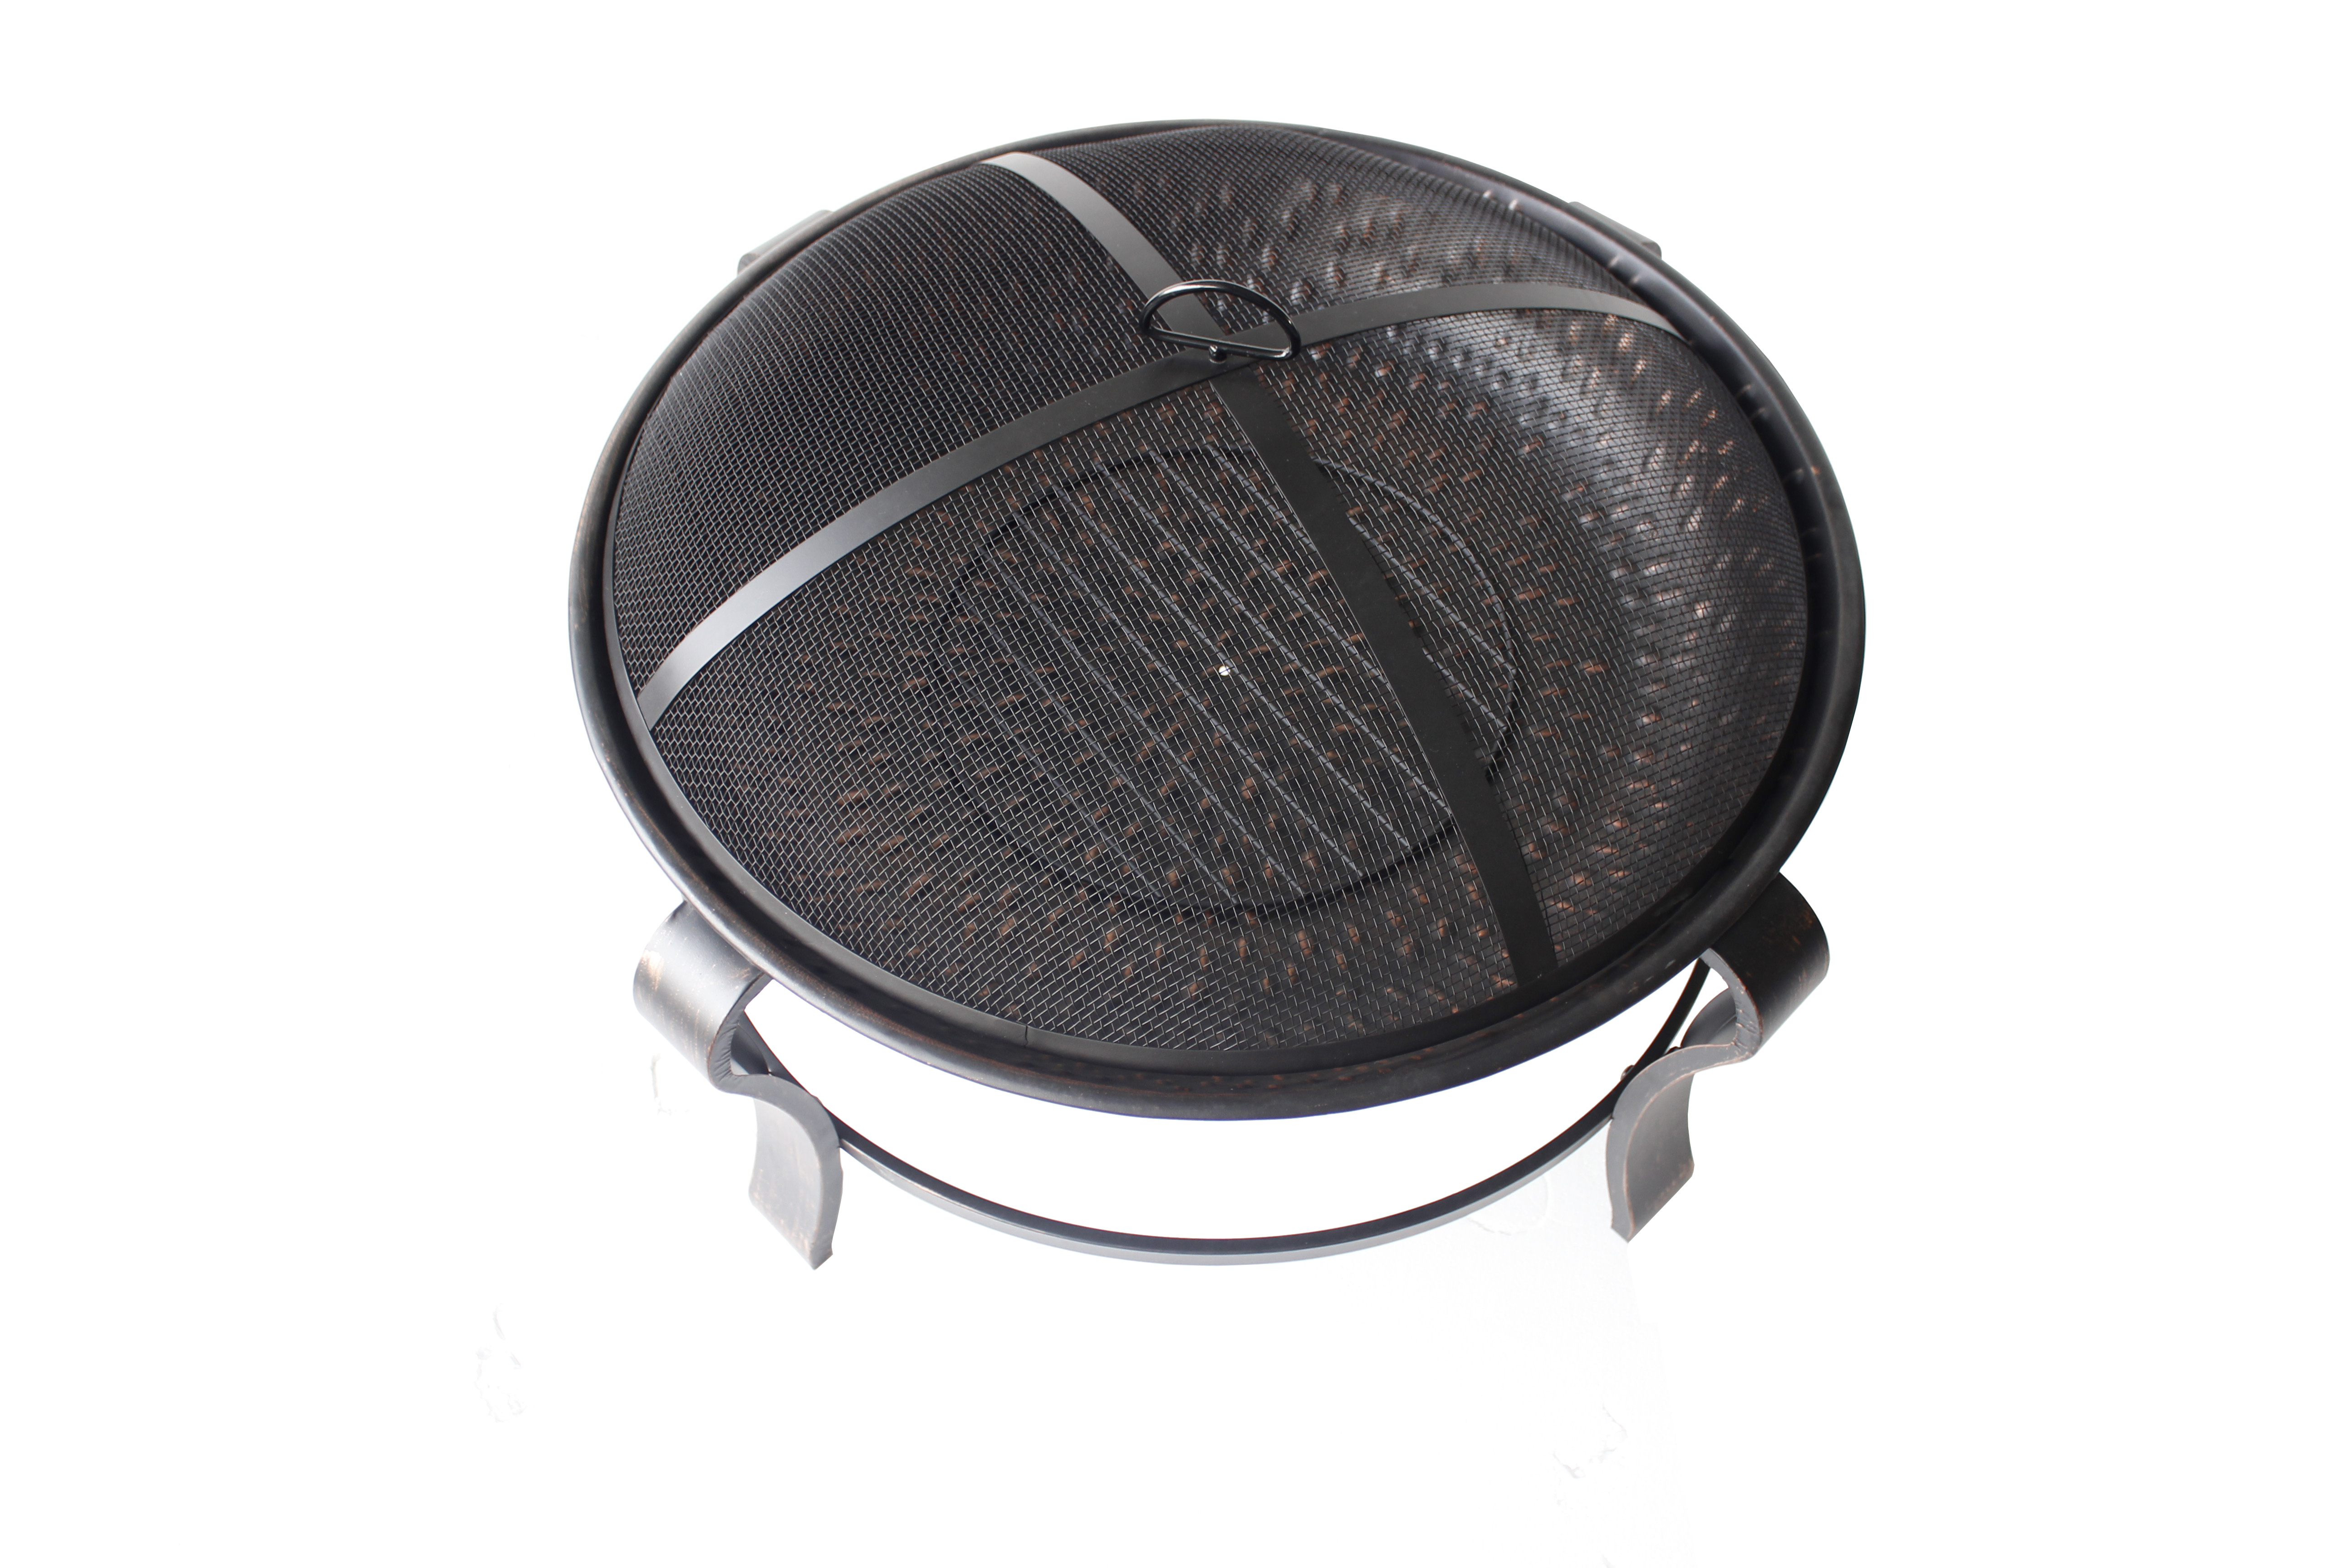 Mainstays Owen Park 28-Inch Round Wood Burning Fire Pit with Mesh Spark Guard - image 3 of 8